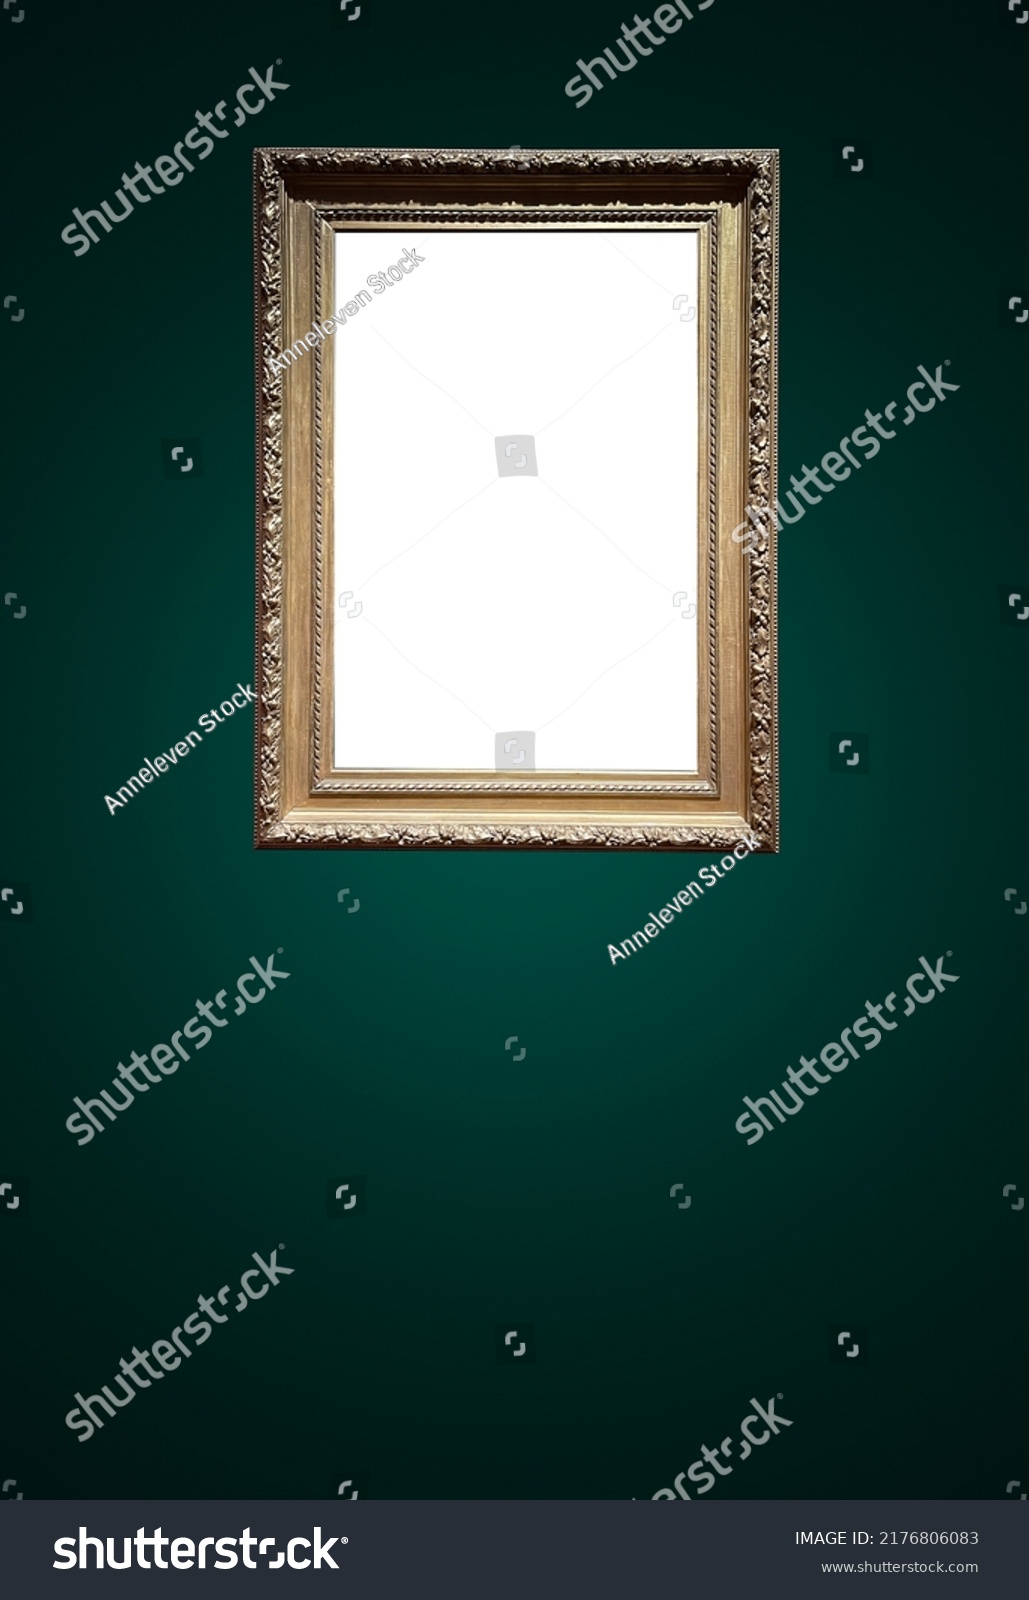 Antique art fair gallery frame on royal green wall at auction house or museum exhibition, blank template with empty white copyspace for mockup design, artwork concept #2176806083